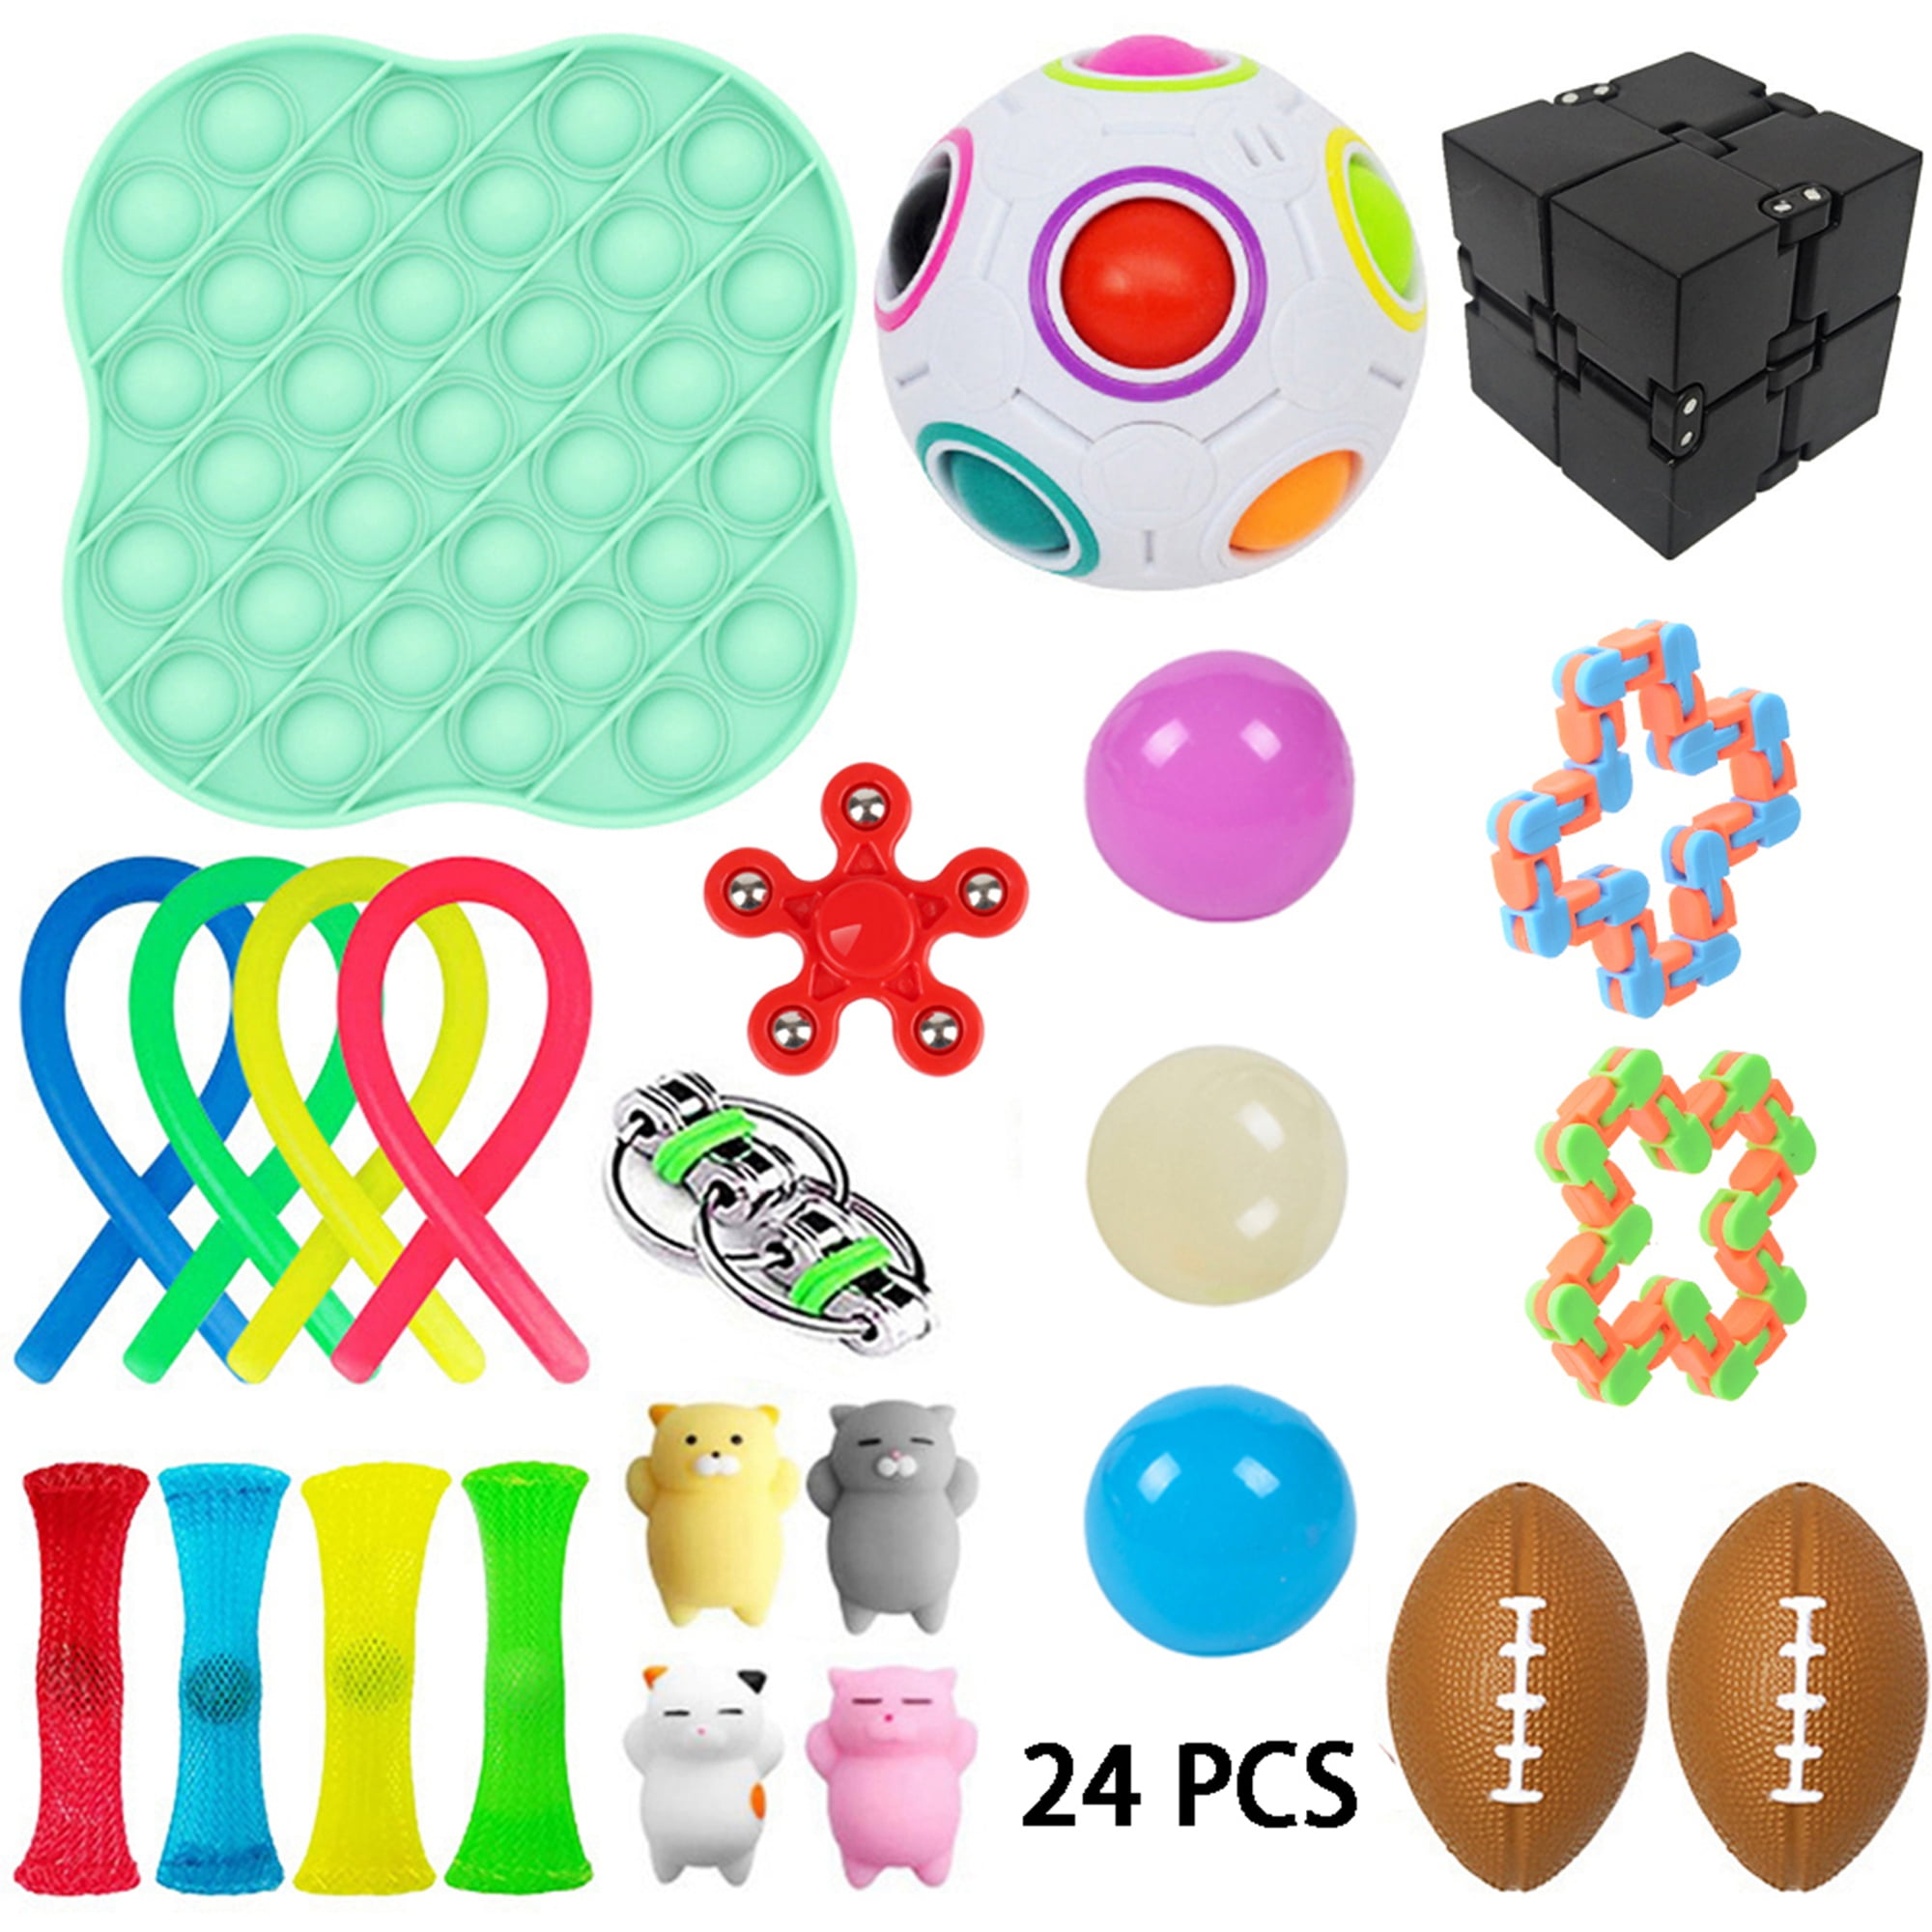 Details about   Fidget Toys Set Sensory Toy Pack For ADHD Stress Relief and Anti-Anxiety Gift US 